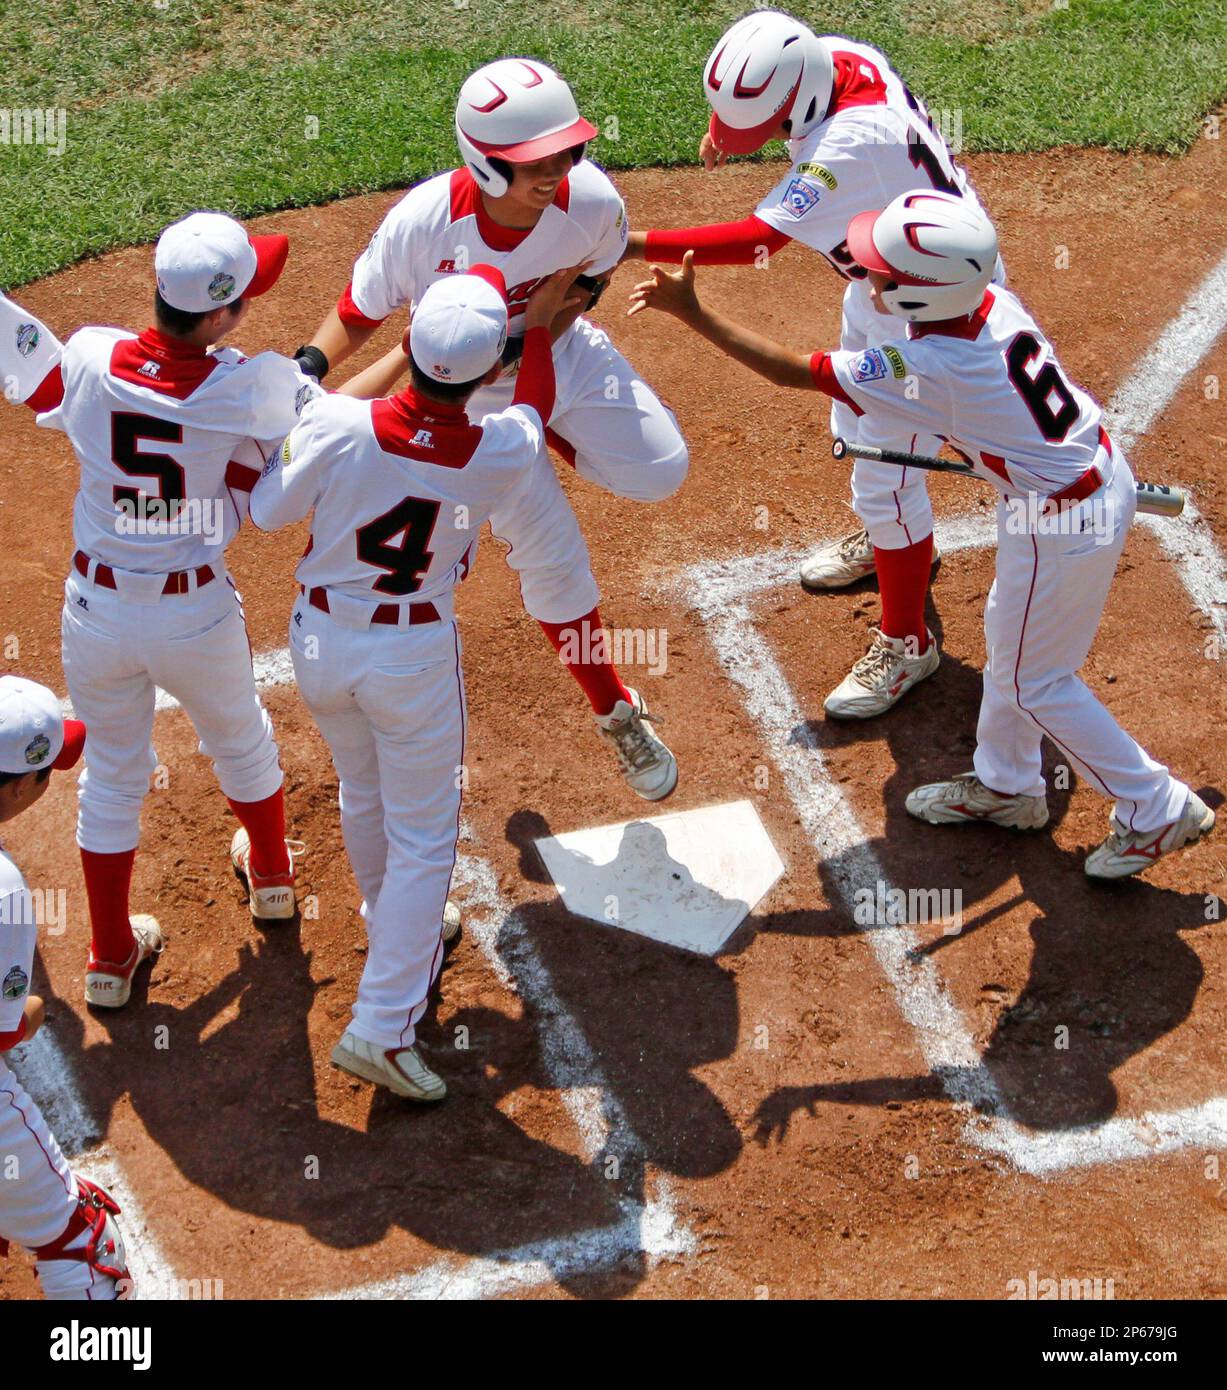 Tokyo's Satoru Aoyama leaps on home plate and celebrates with teammates after hitting a solo home run off Aguadulce, Panama, pitcher James Gonzalez in the first inning of the international championship baseball game at the Little League World Series, Saturday, Aug. 25, 2012, in South Williamsport, Pa. Tokyo won 10-2. (AP Photo/Gene J. Puskar) Stock Photo